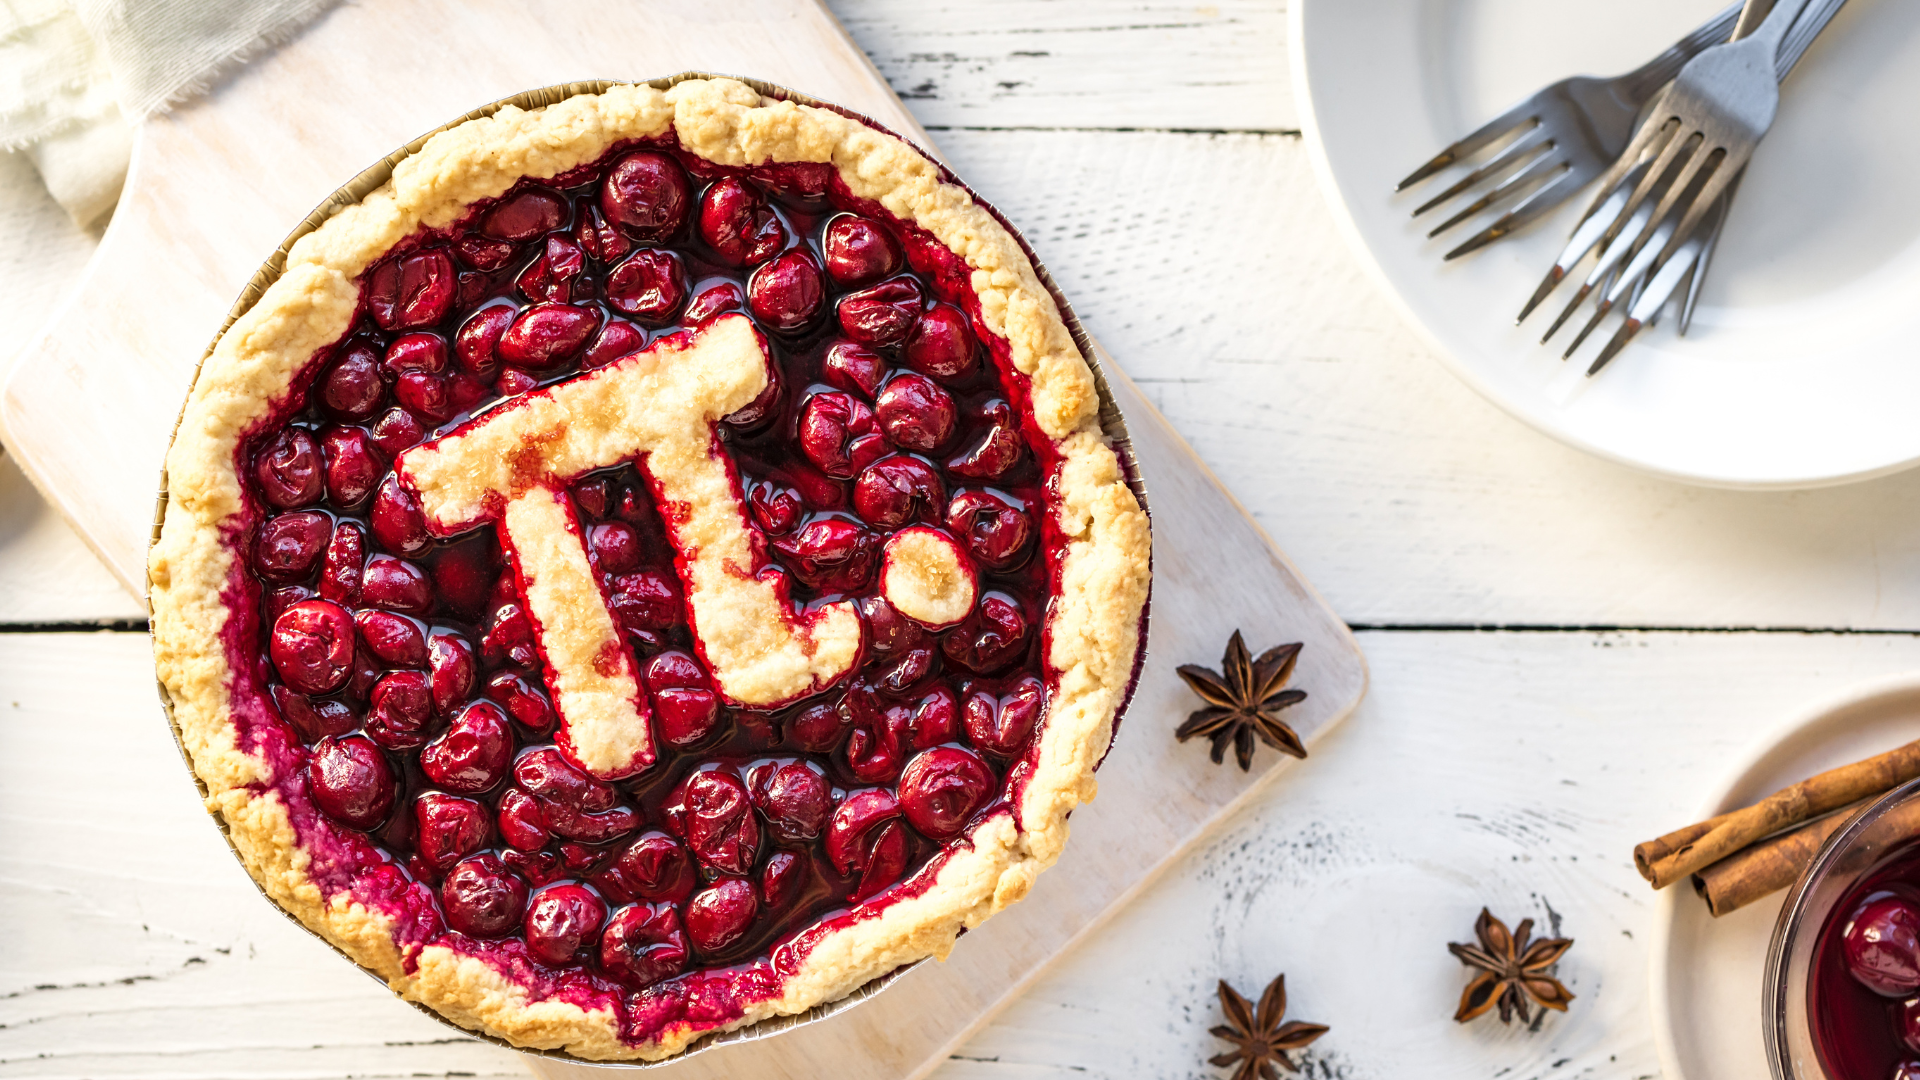 Celebrate Pi Day with These 3 Ideas